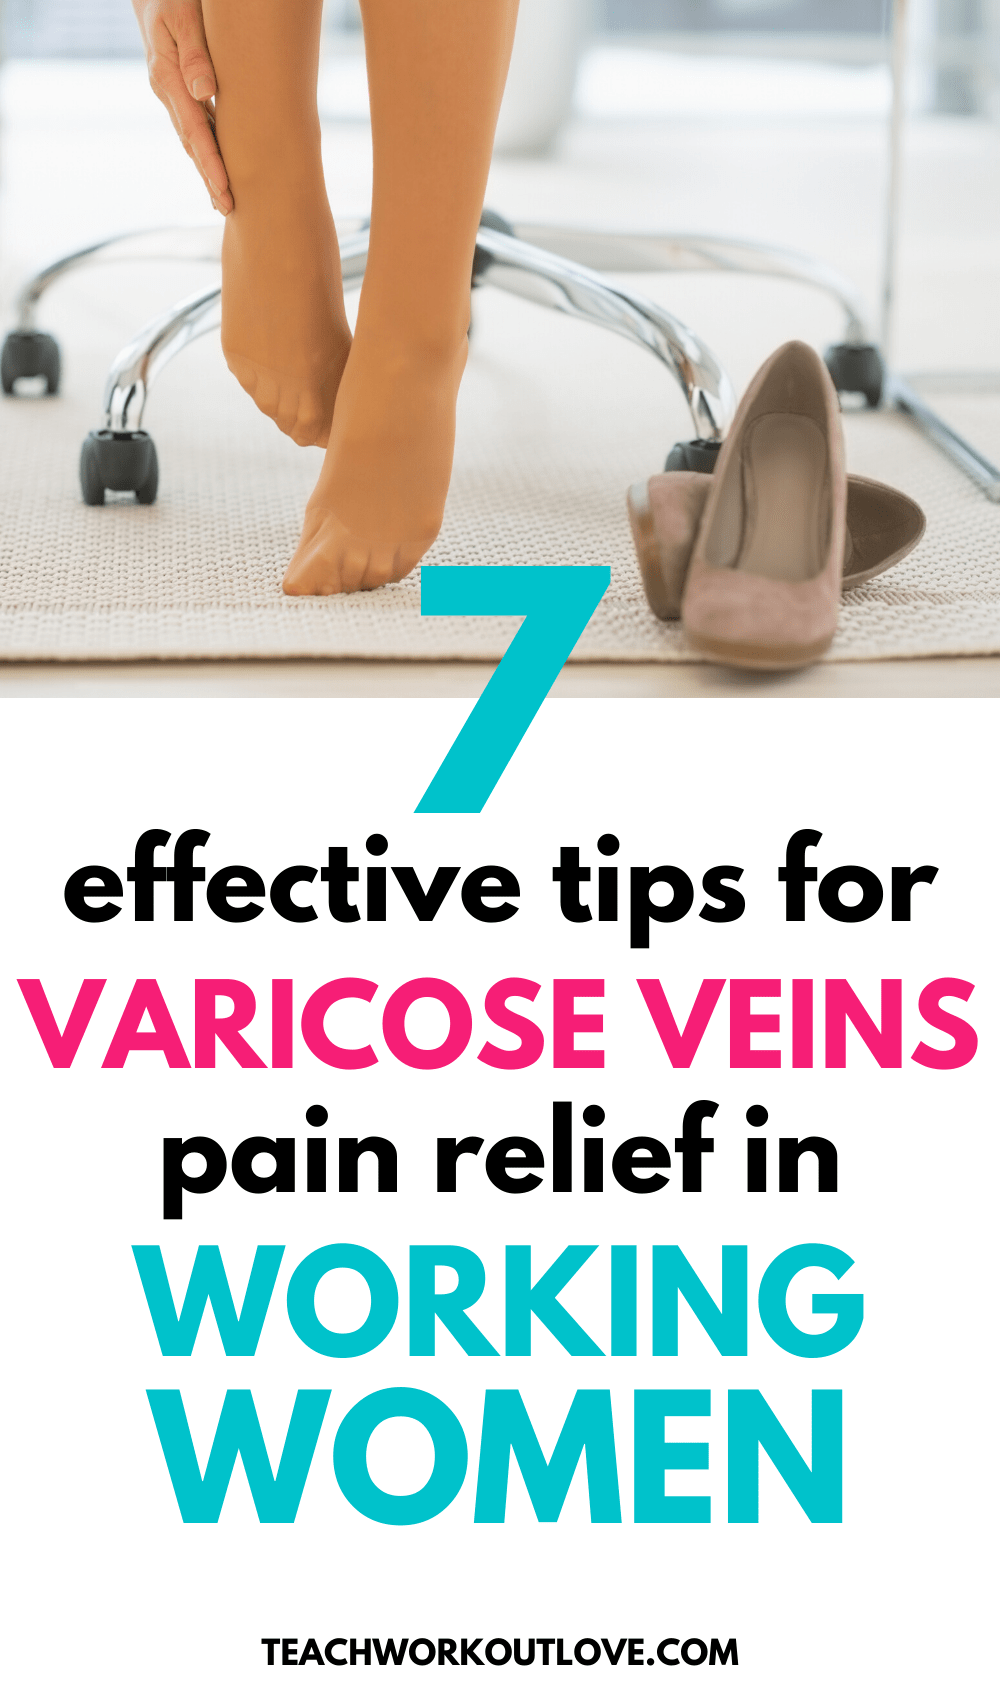 Women are a lot more susceptible to varicose veins than men. Here are a ew tips for working women to relieve themselves of the constant pain and discomfort.